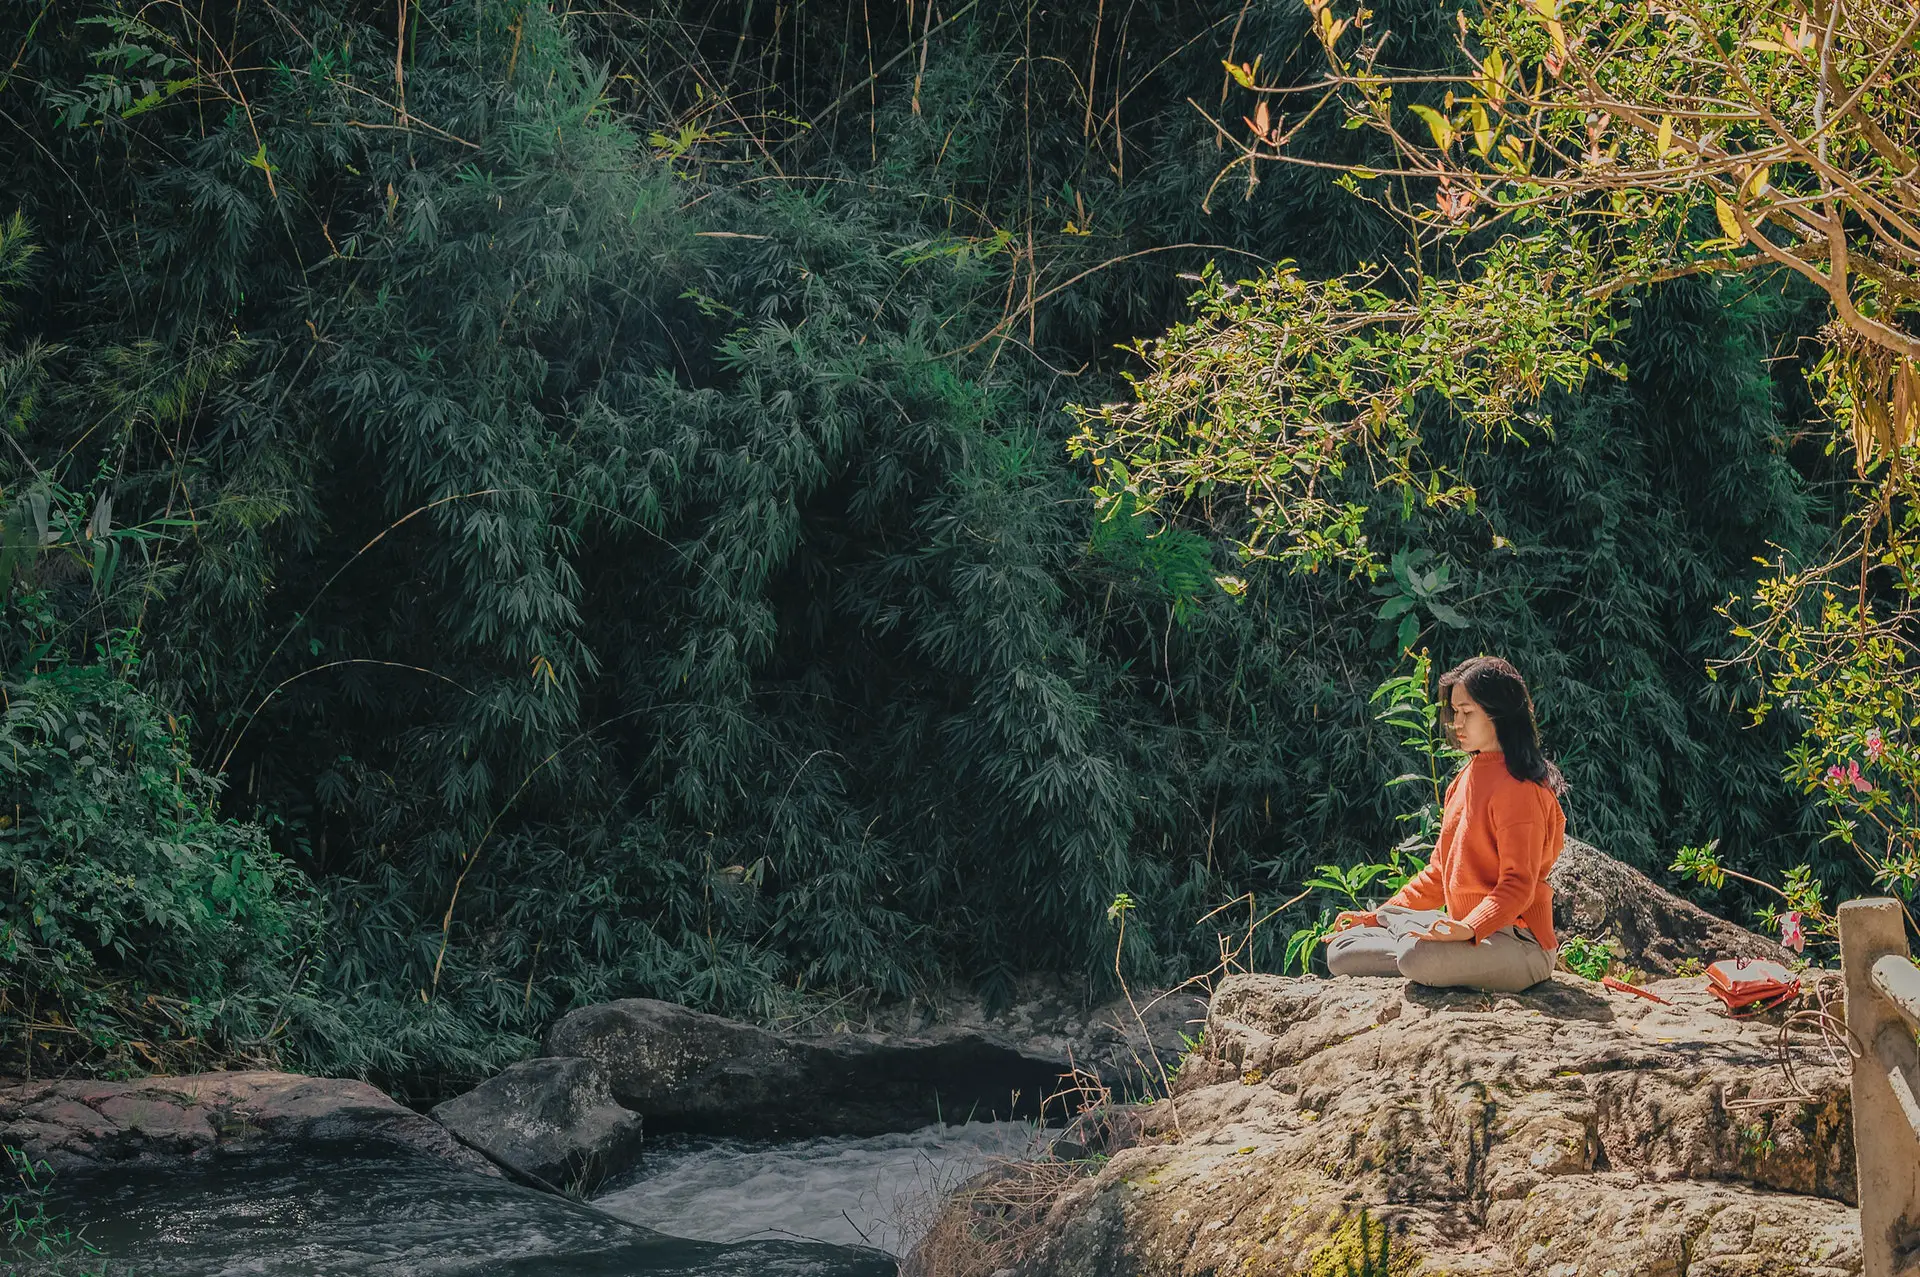 meditating in natural settings helps calm your mind